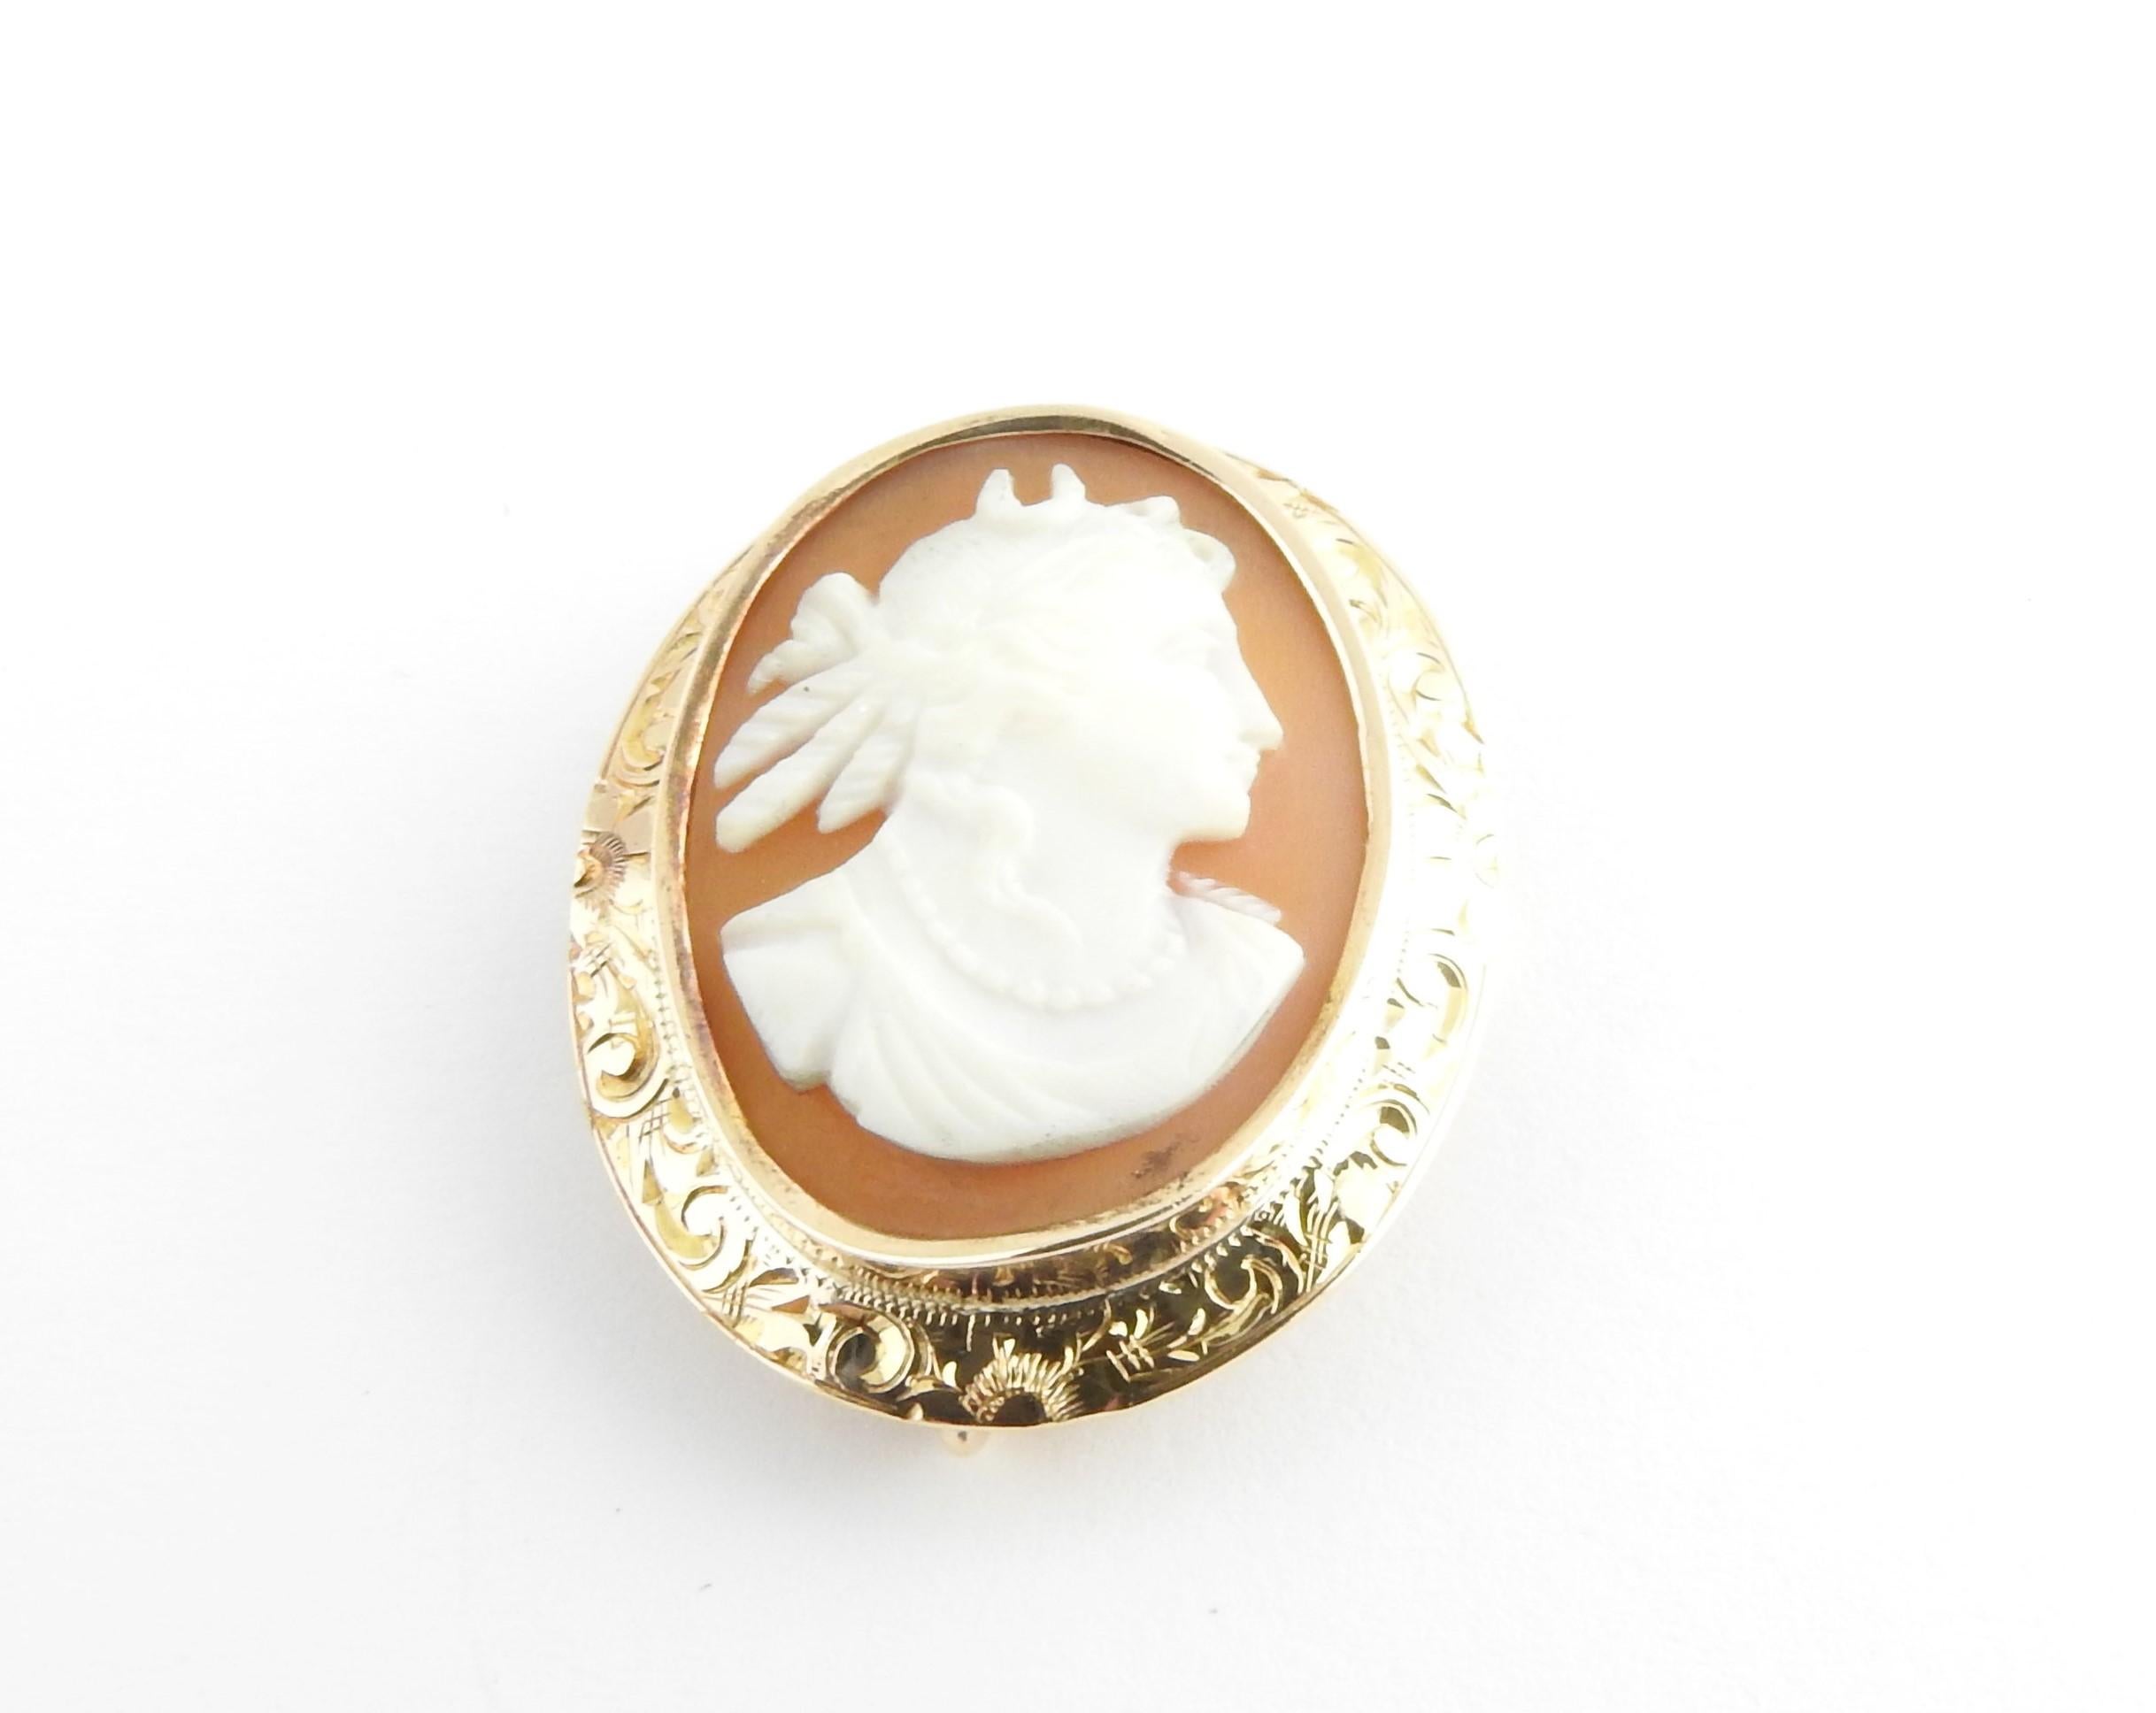 Vintage 10 Karat Yellow Gold Cameo Brooch

This stunning cameo brooch features a lovely lady in profile framed in beautifully detailed 10K yellow gold.

Size: 31 mm x 26 mm

Weight: 3.2 dwt. / 5.1 gr.

Stamped: Acid tested for 10K gold.

Very good